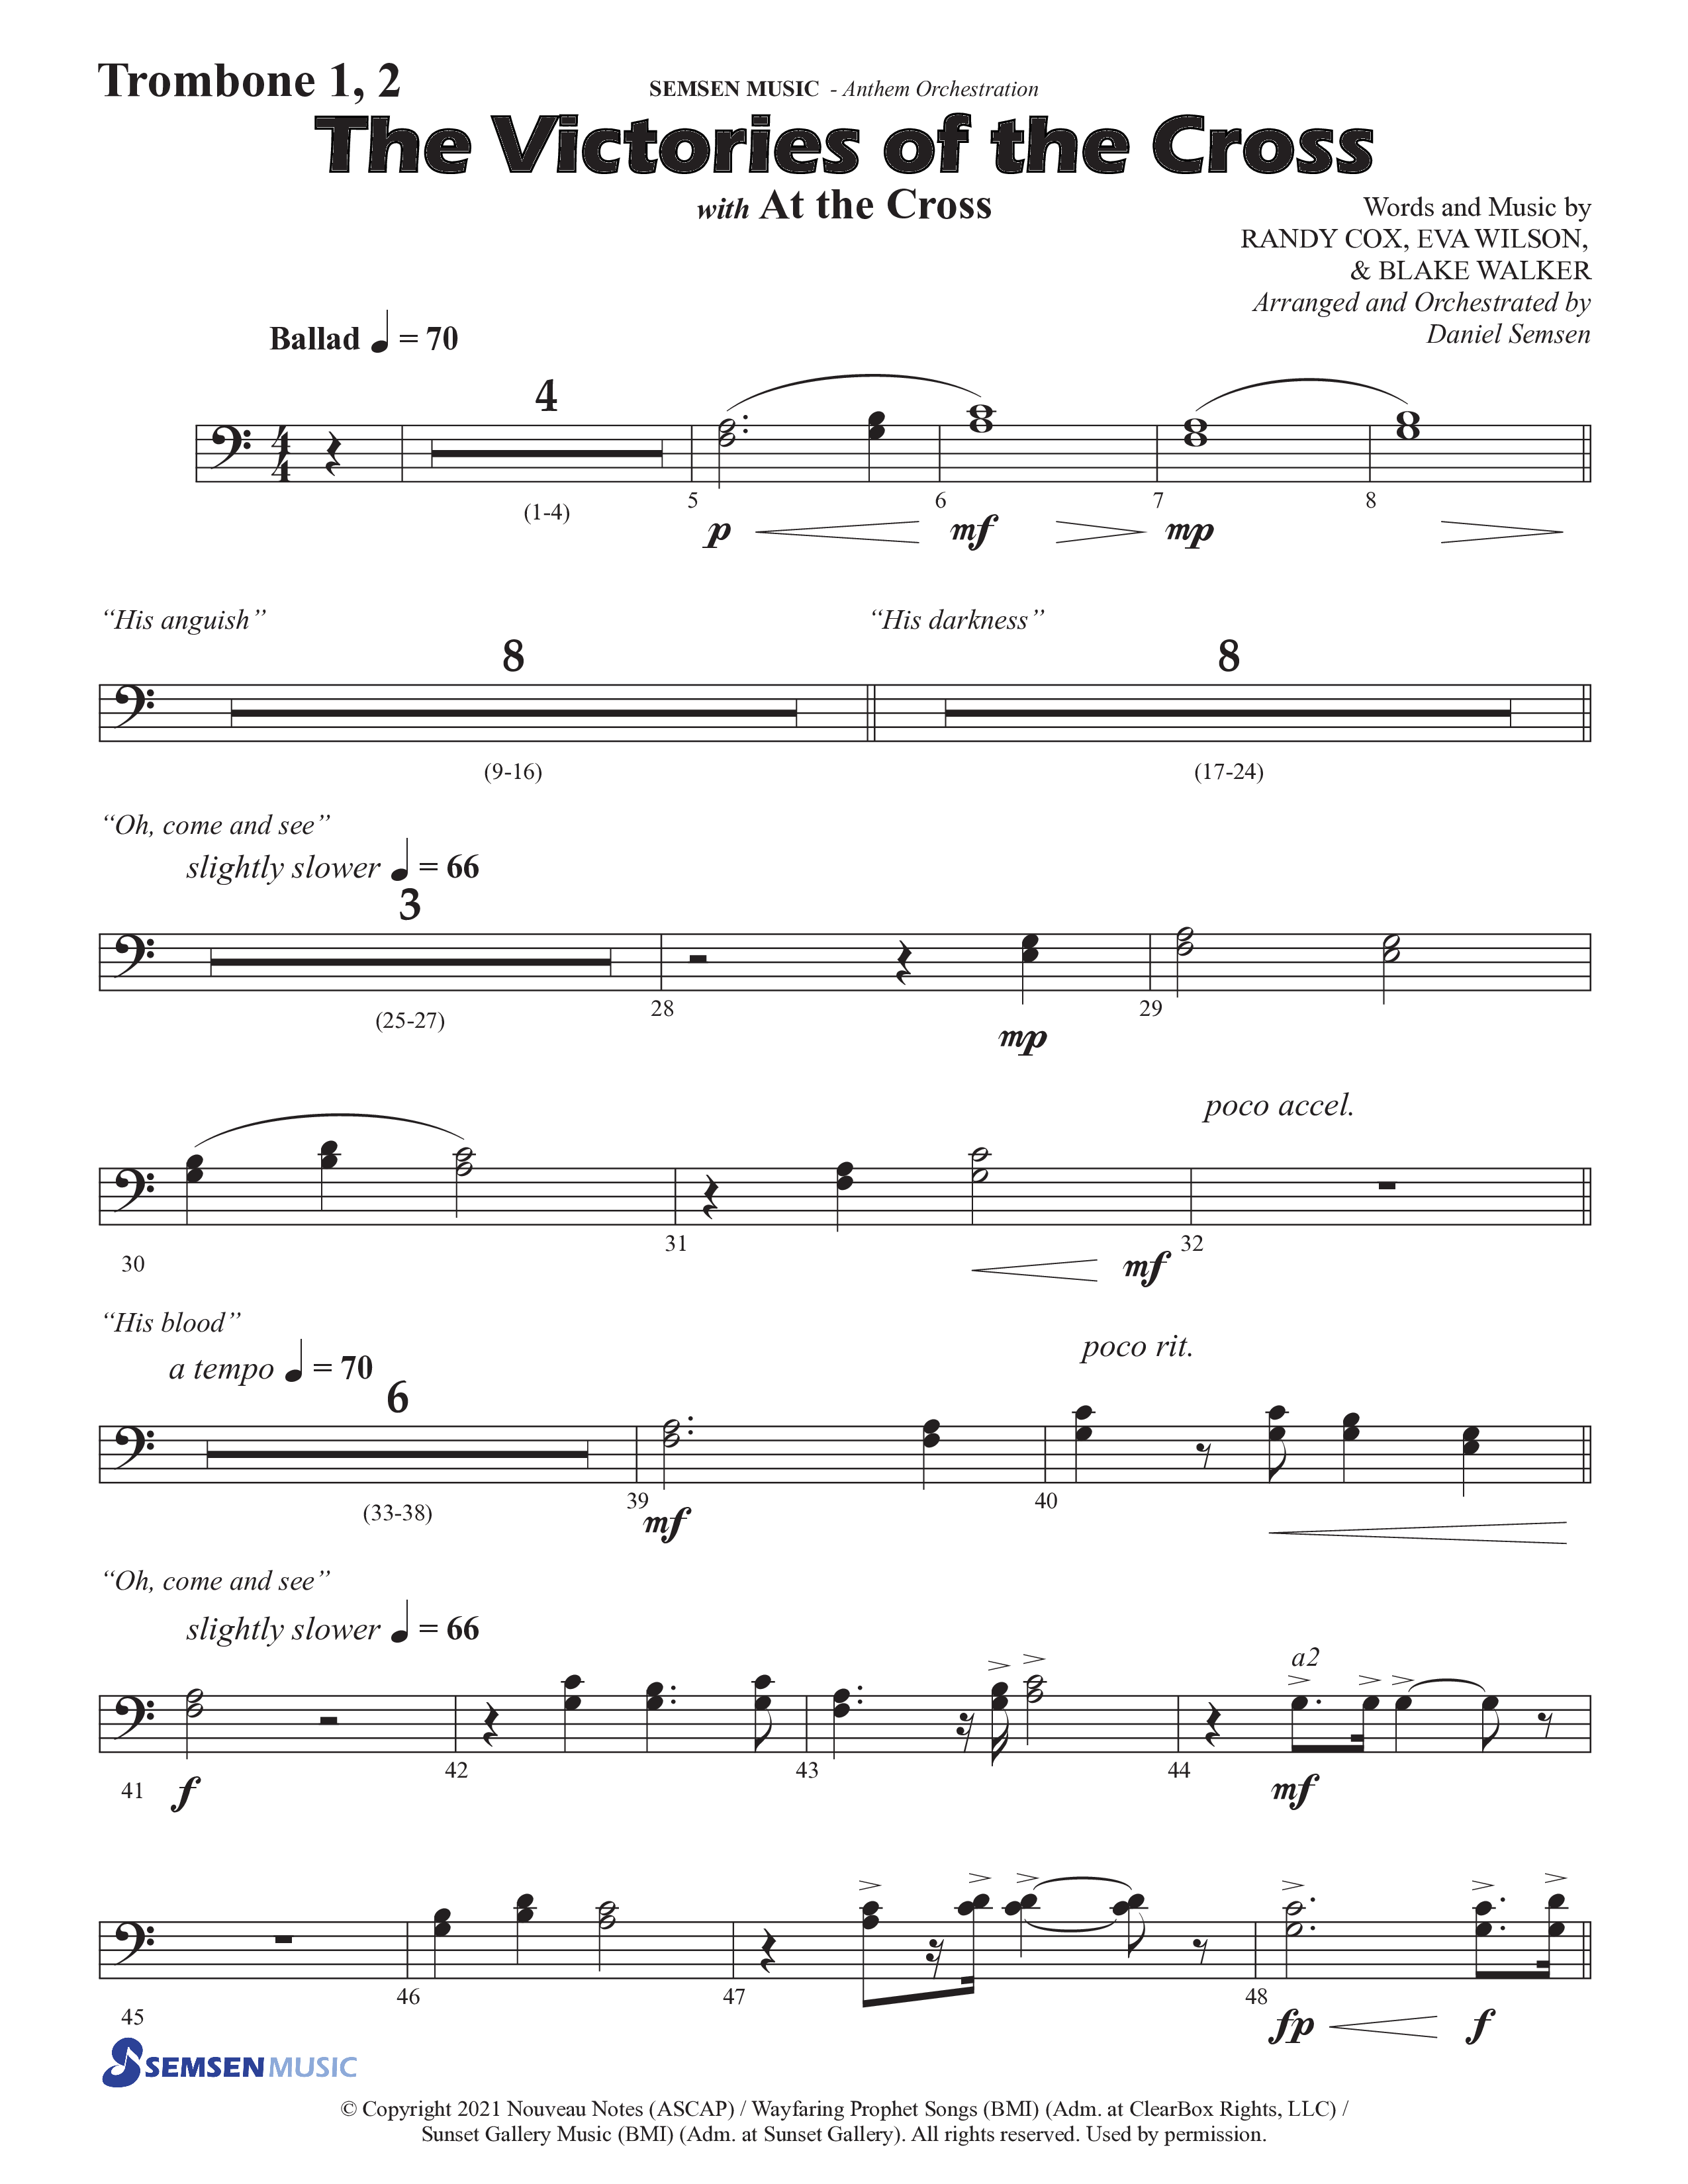 The Victories Of The Cross (with At The Cross) (Choral Anthem SATB) Trombone 1/2 (Semsen Music / Arr. Daniel Semsen)